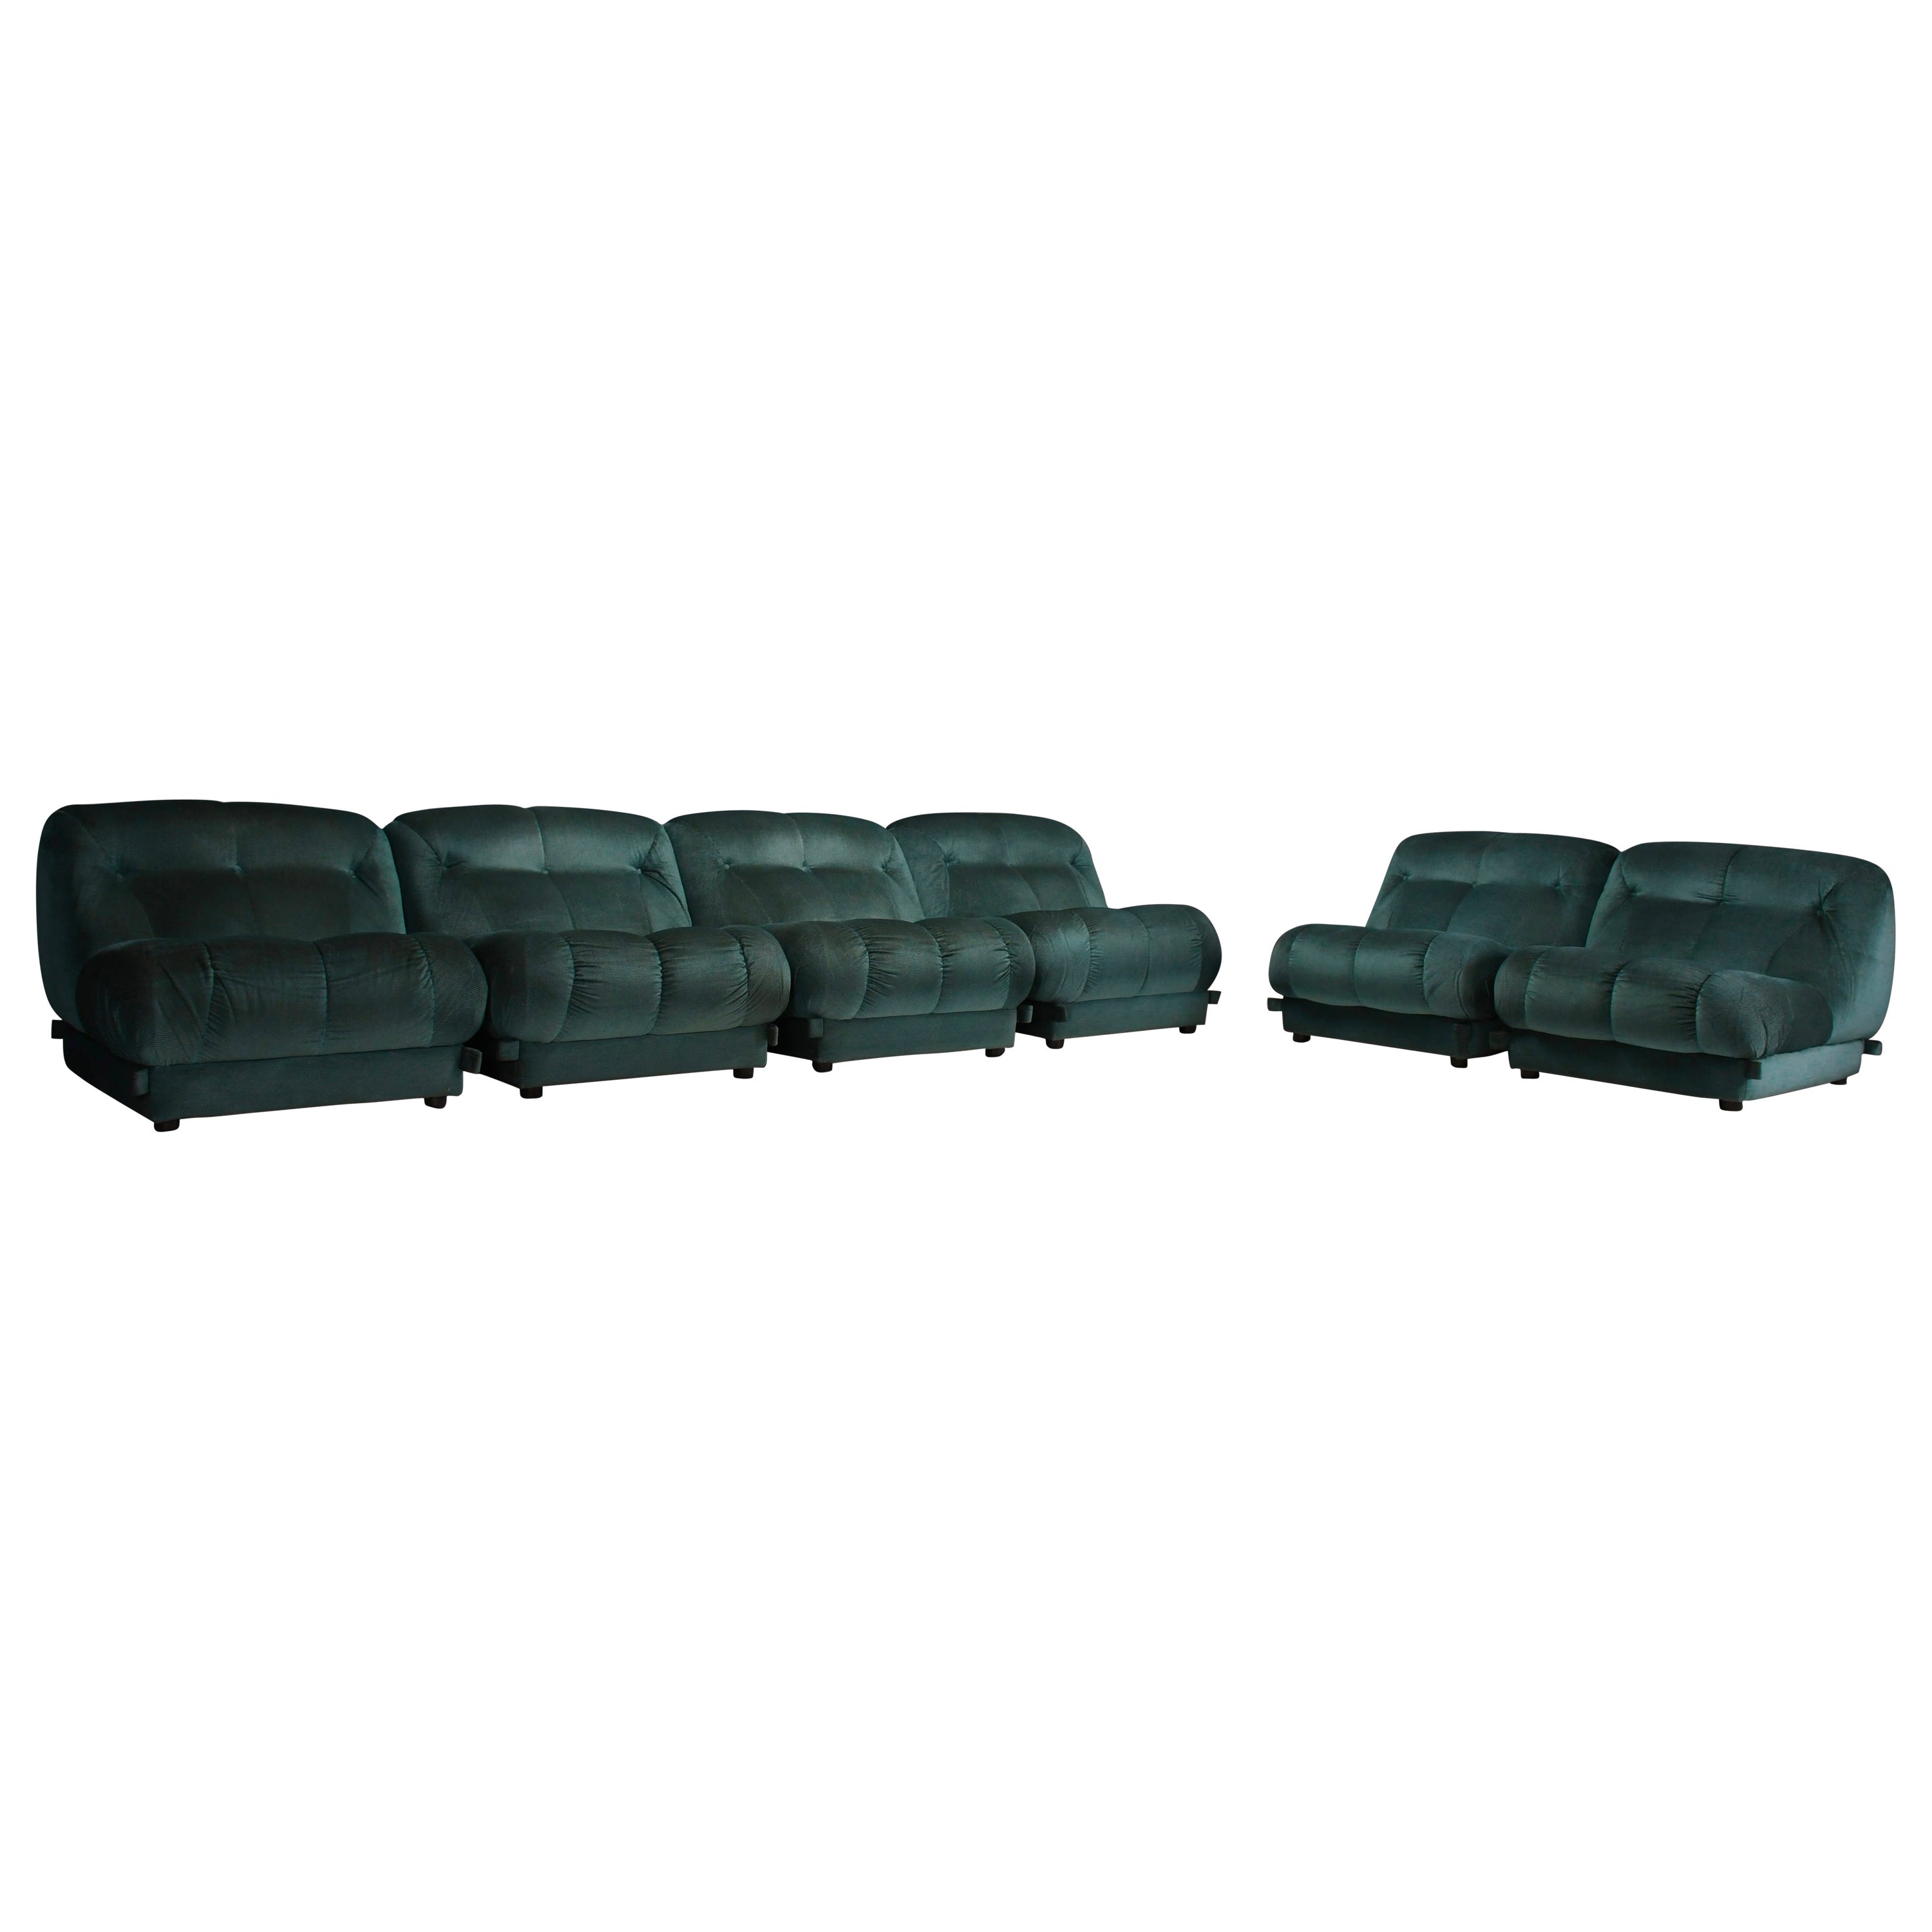 Large Modular Sectional ‘Nuvolone’ Sofa by Rino Maturi in Green Fabric, 1970s For Sale